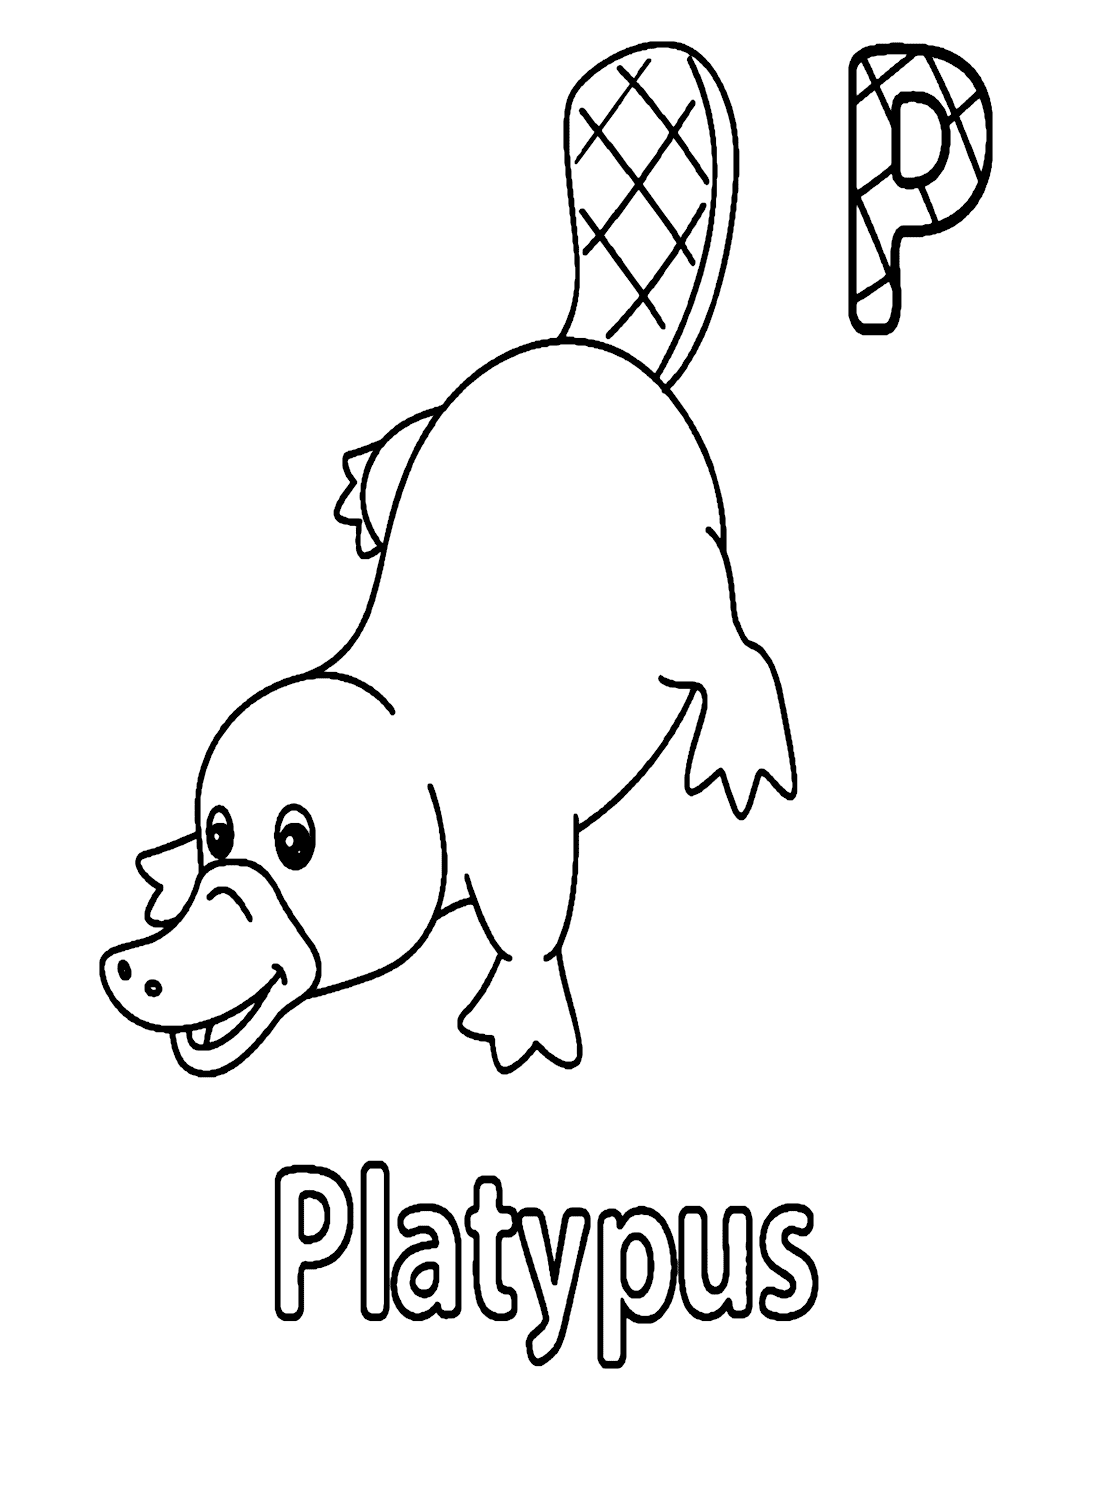 Letter P For Platypus from Platypus